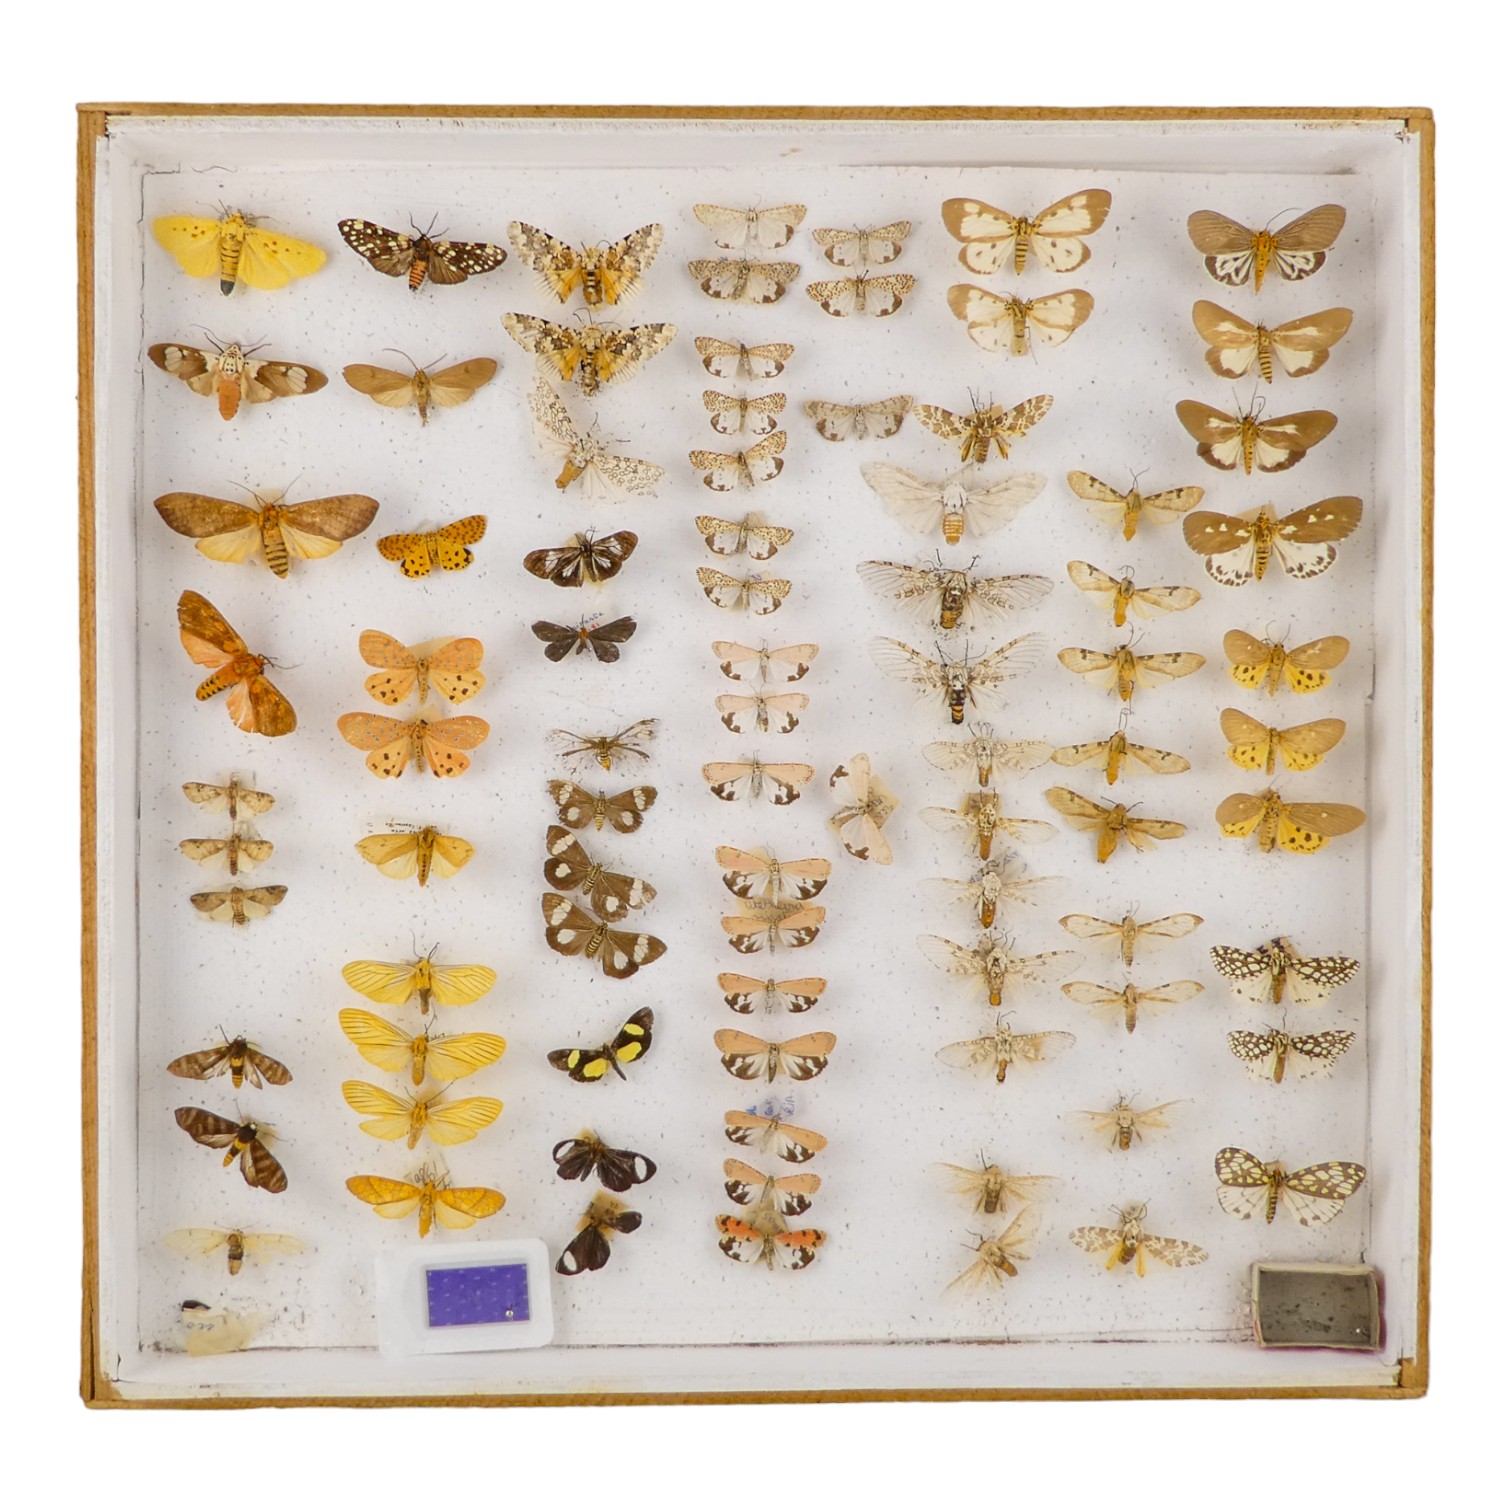 A case of moths in seven rows - including Lyces Ariaca and Asota Heliconia